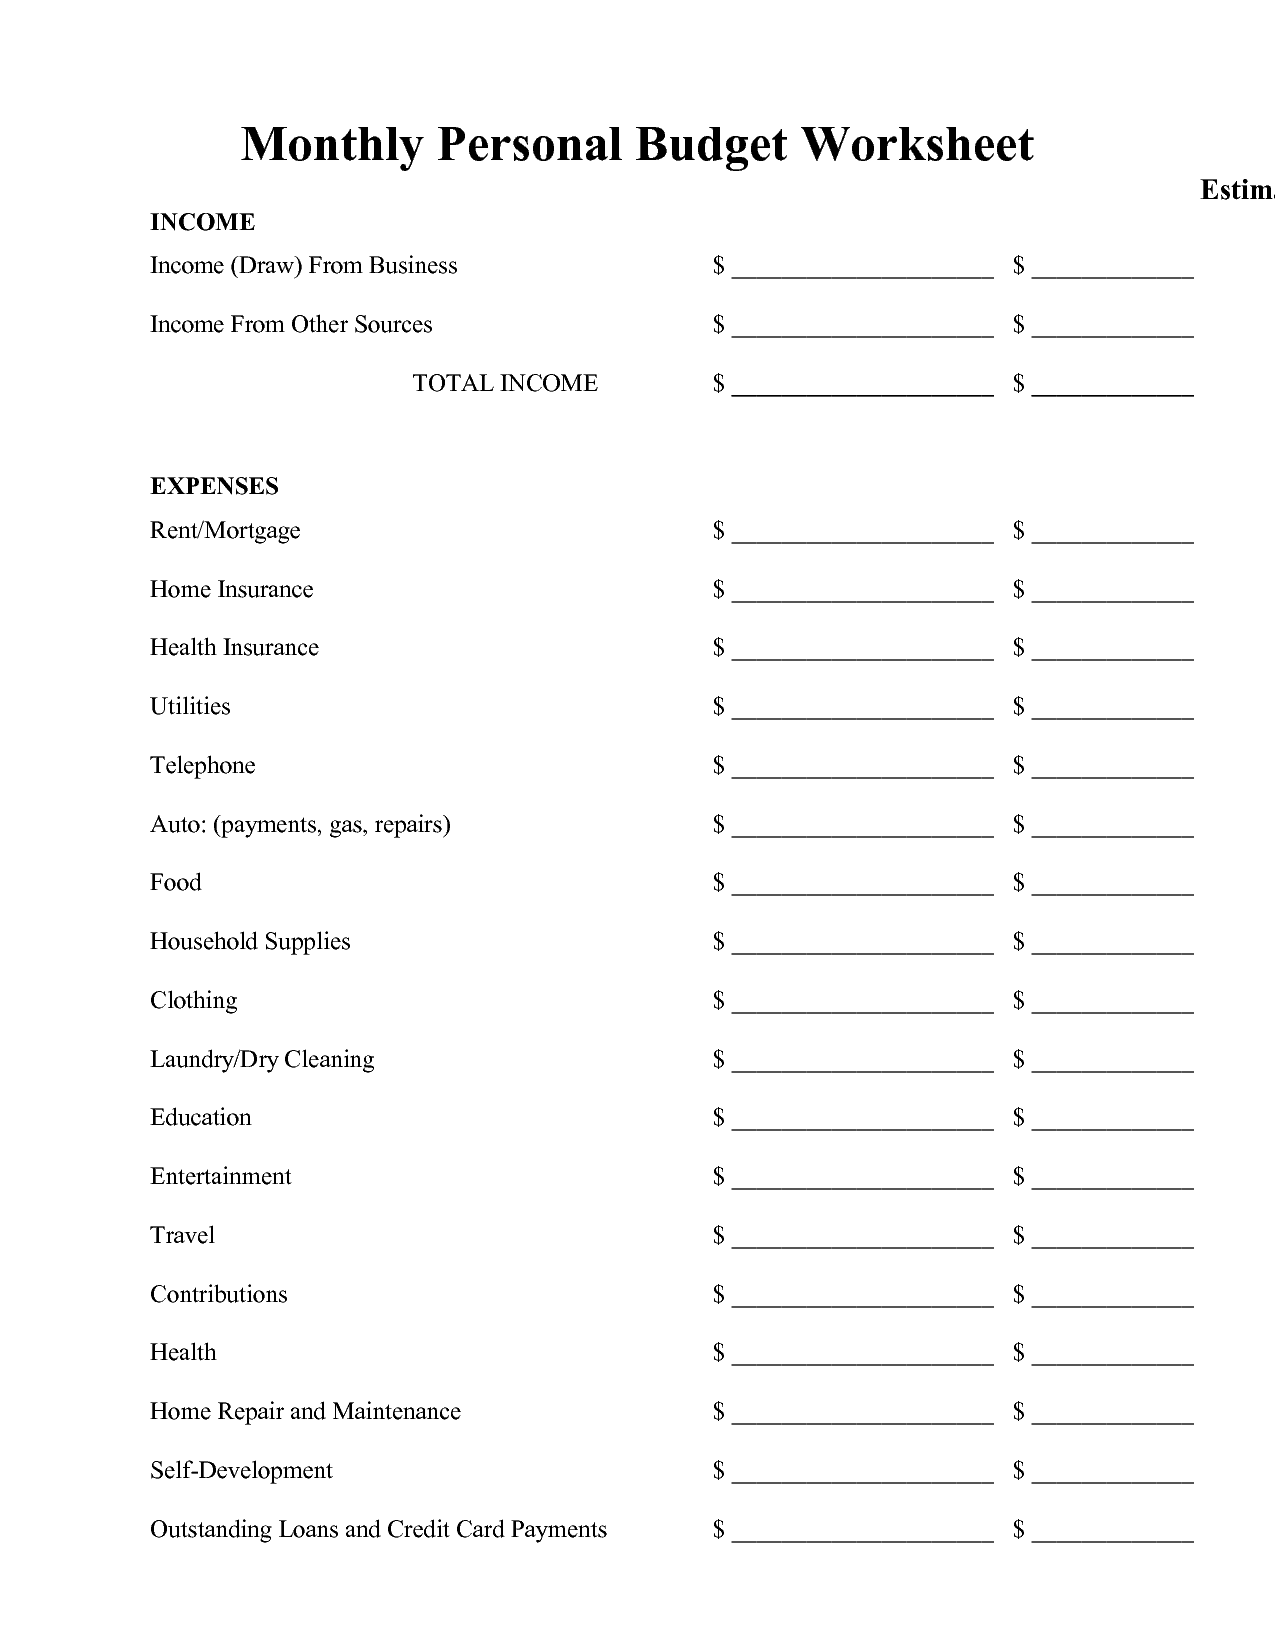 14-best-images-of-monthly-budget-planning-worksheet-printable